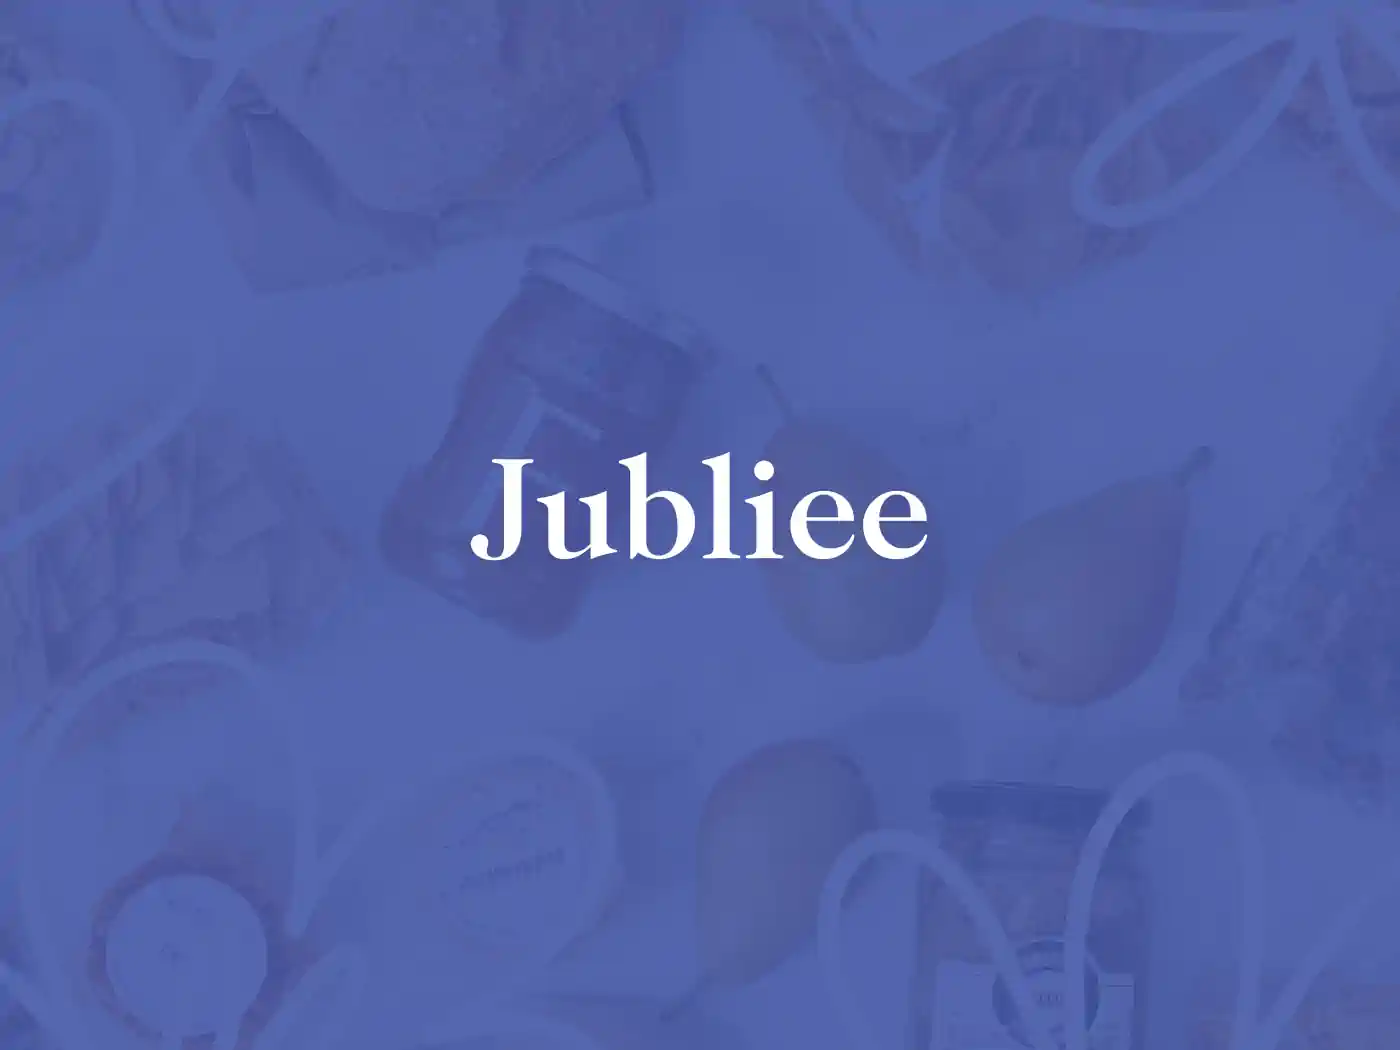  A vibrant display of assorted gourmet foods with "Jubilee" text overlay, representing the "Jubilee" collection by Fabulous Flowers and Gifts.